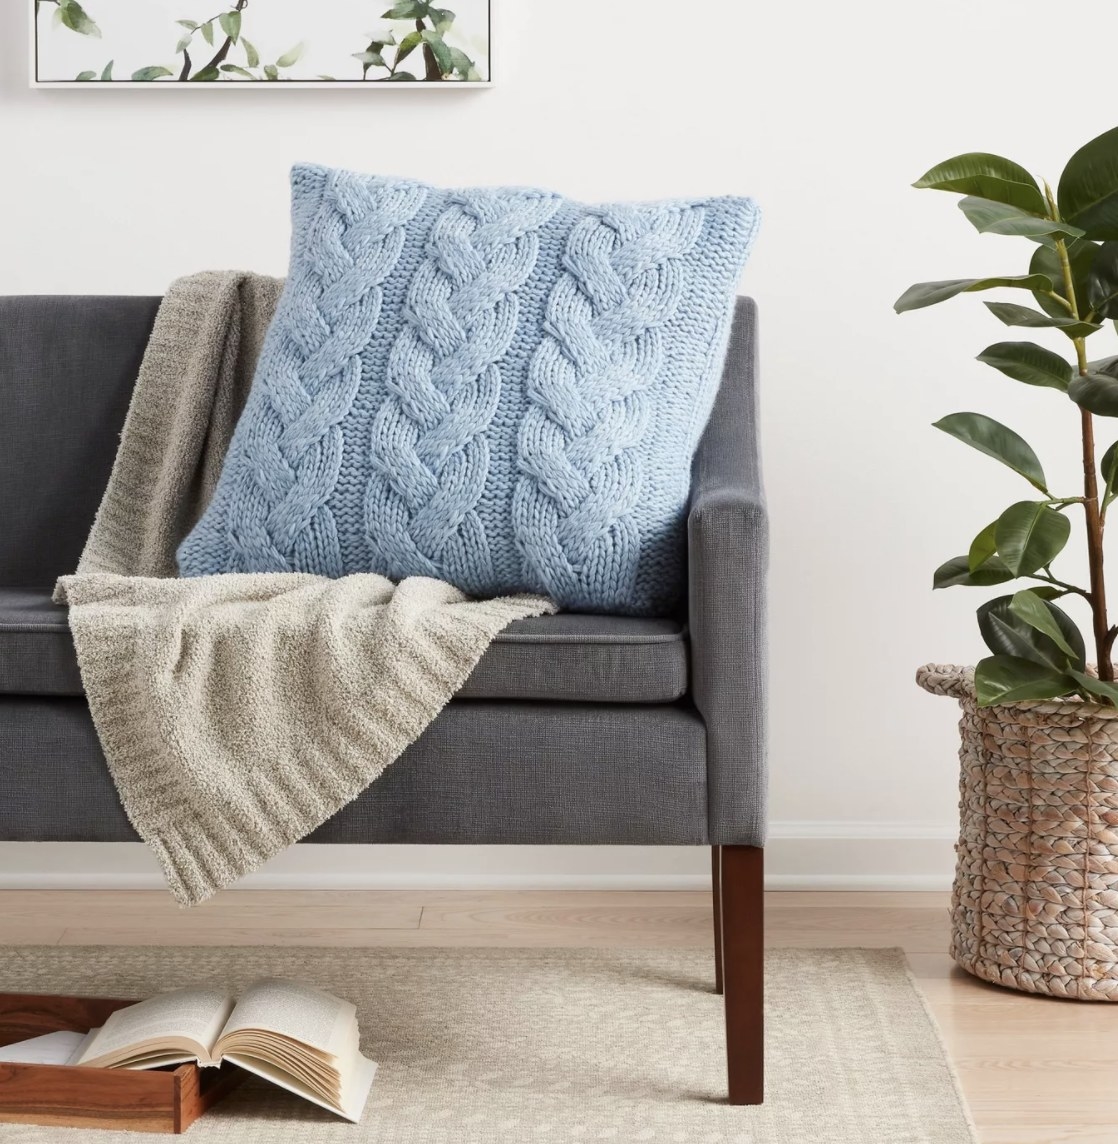 The light blue cable knit pillow is on a grey couch